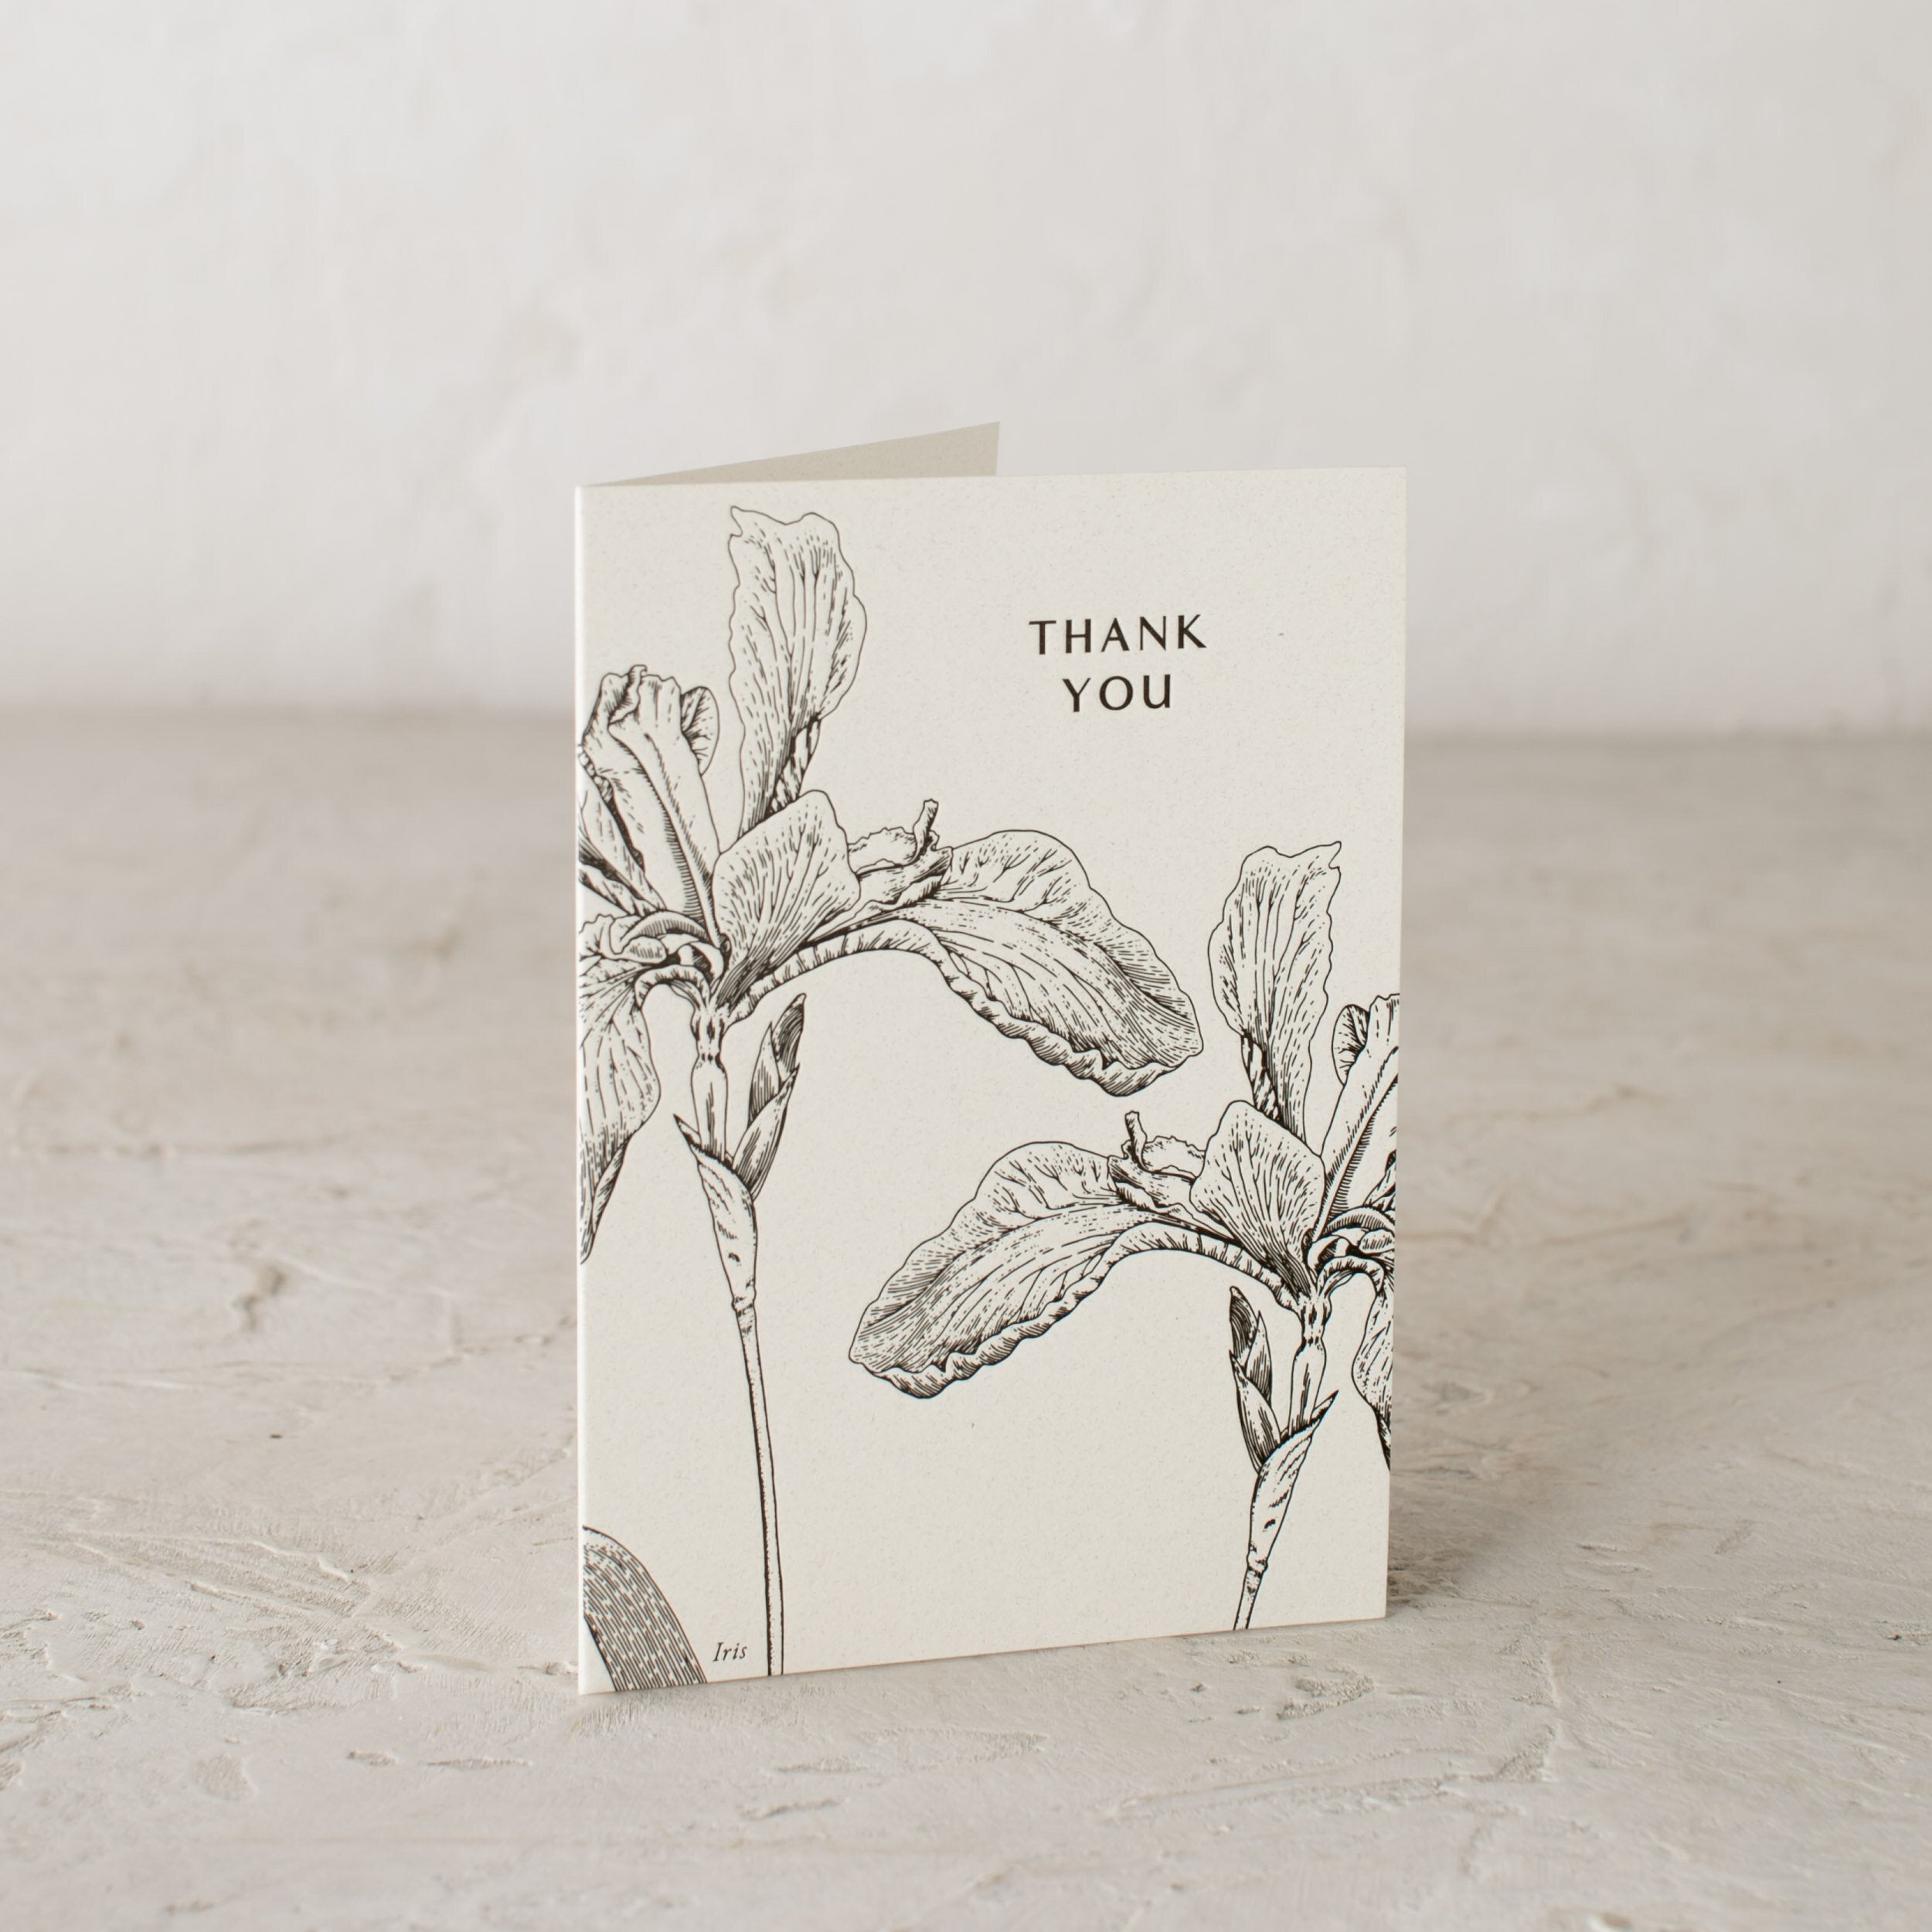 Letter pressed greeting card with a botanical illustrated Iris, "Thank You" - Designed and sold by Verdant, Kansas City.